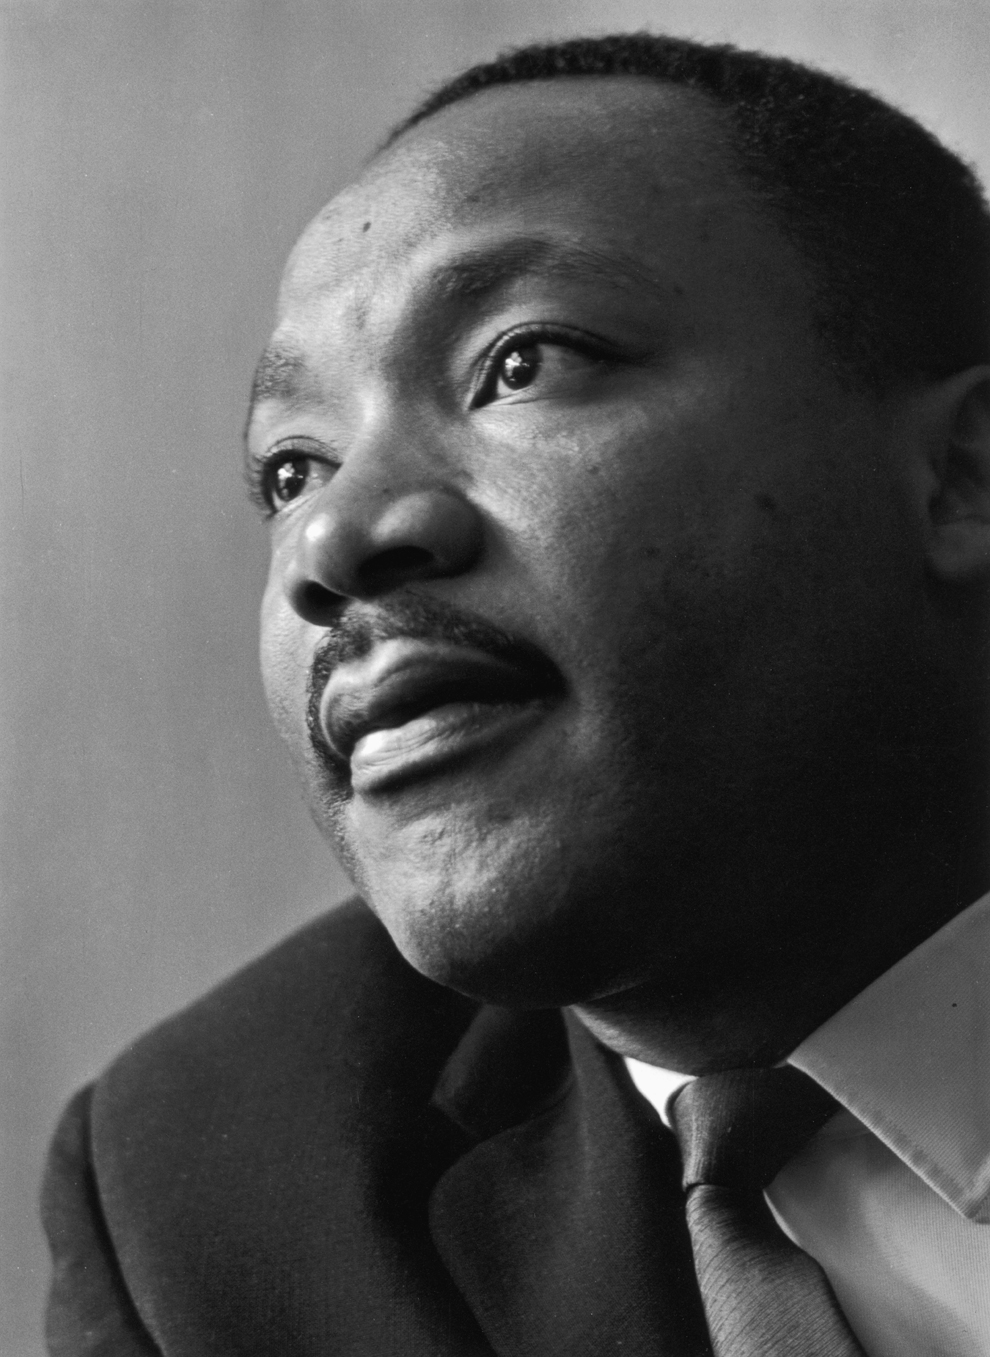 Martin Luther King Jr Day 2020 - HD Wallpaper 